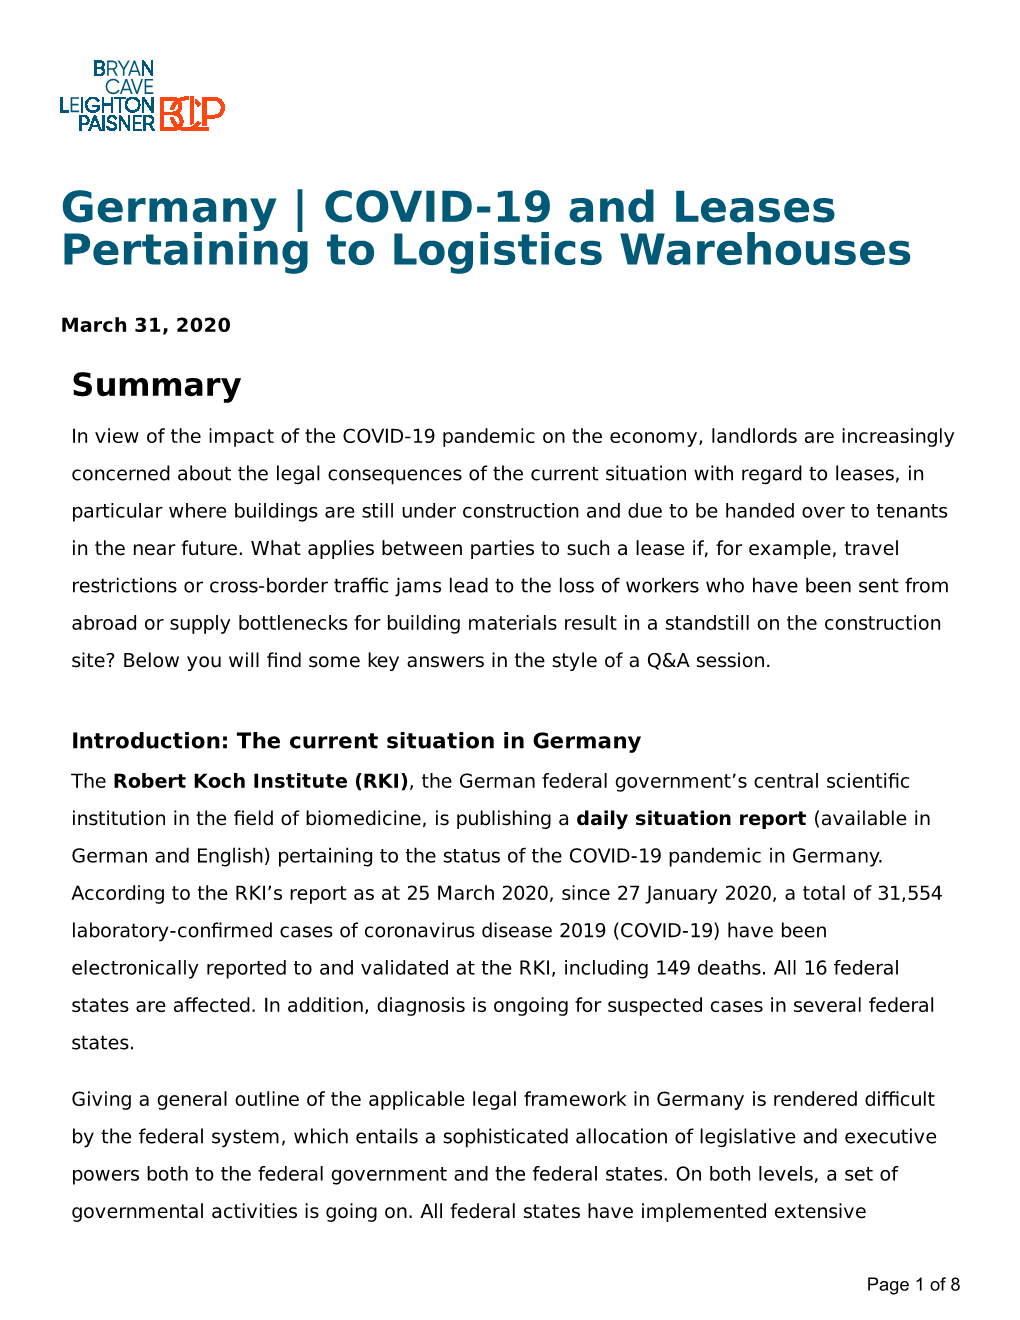 Germany | COVID-19 and Leases Pertaining to Logistics Warehouses